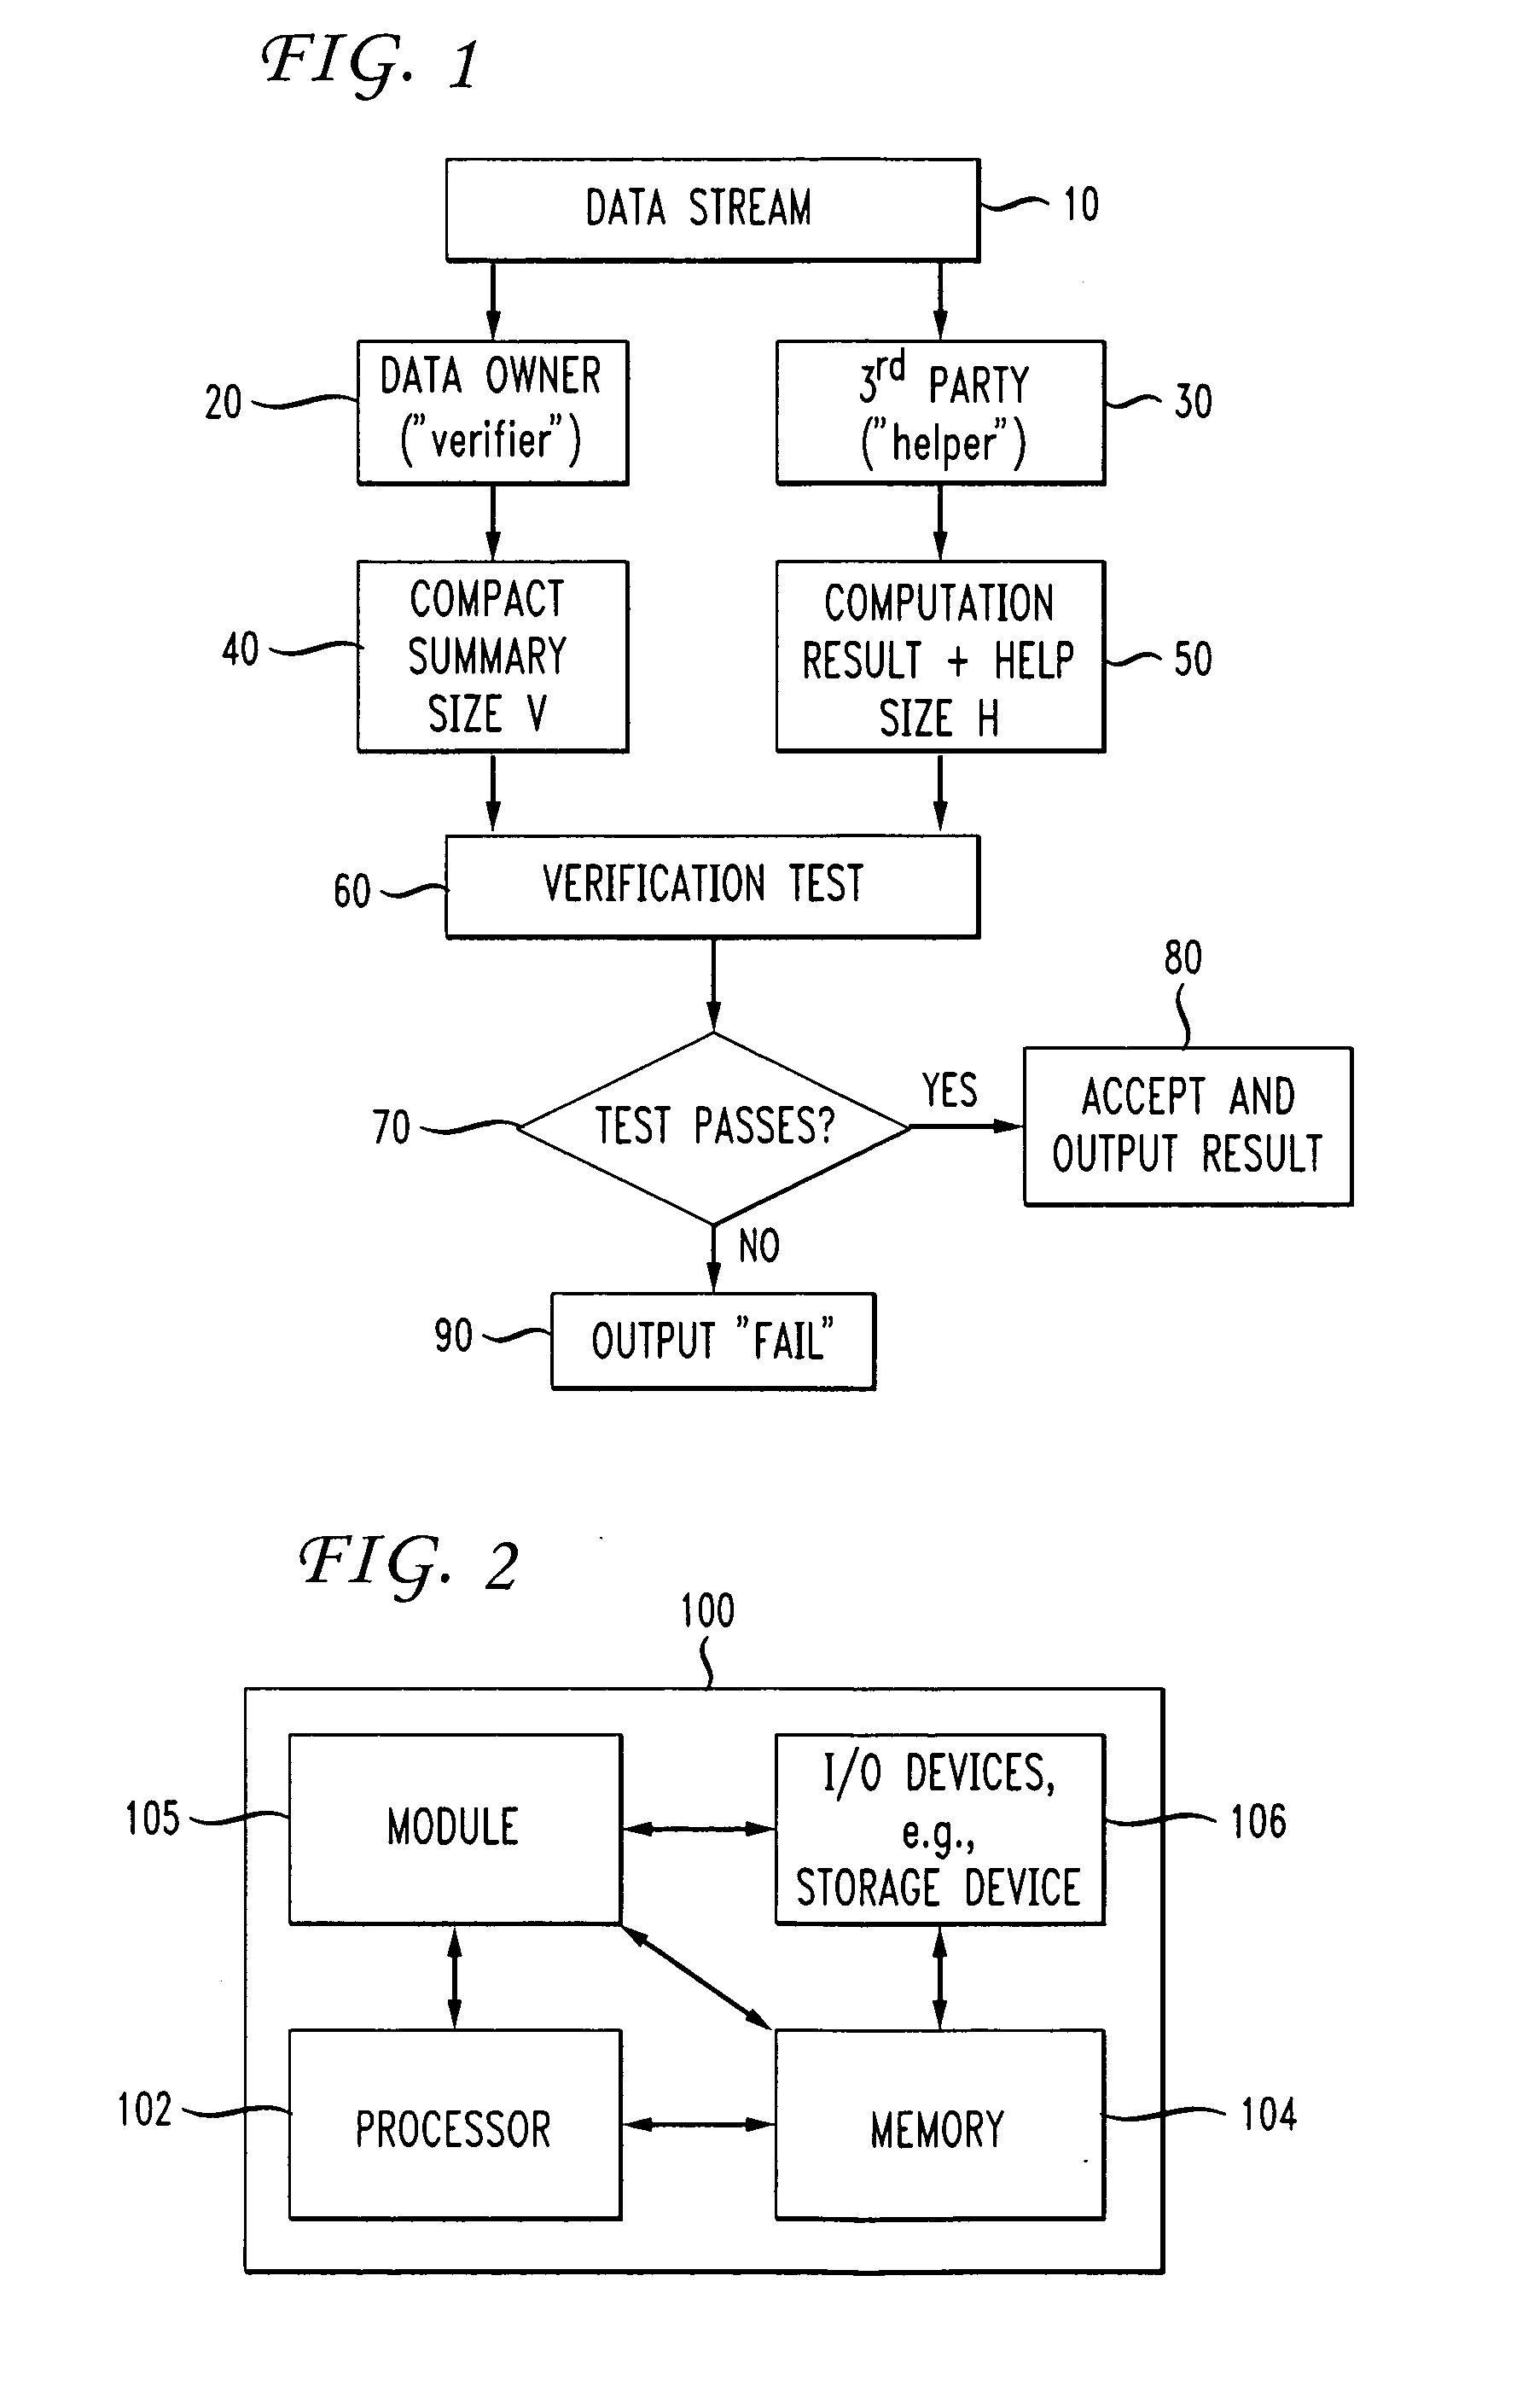 Verification Of Data Stream Computations Using Third-Party-Supplied Annotations